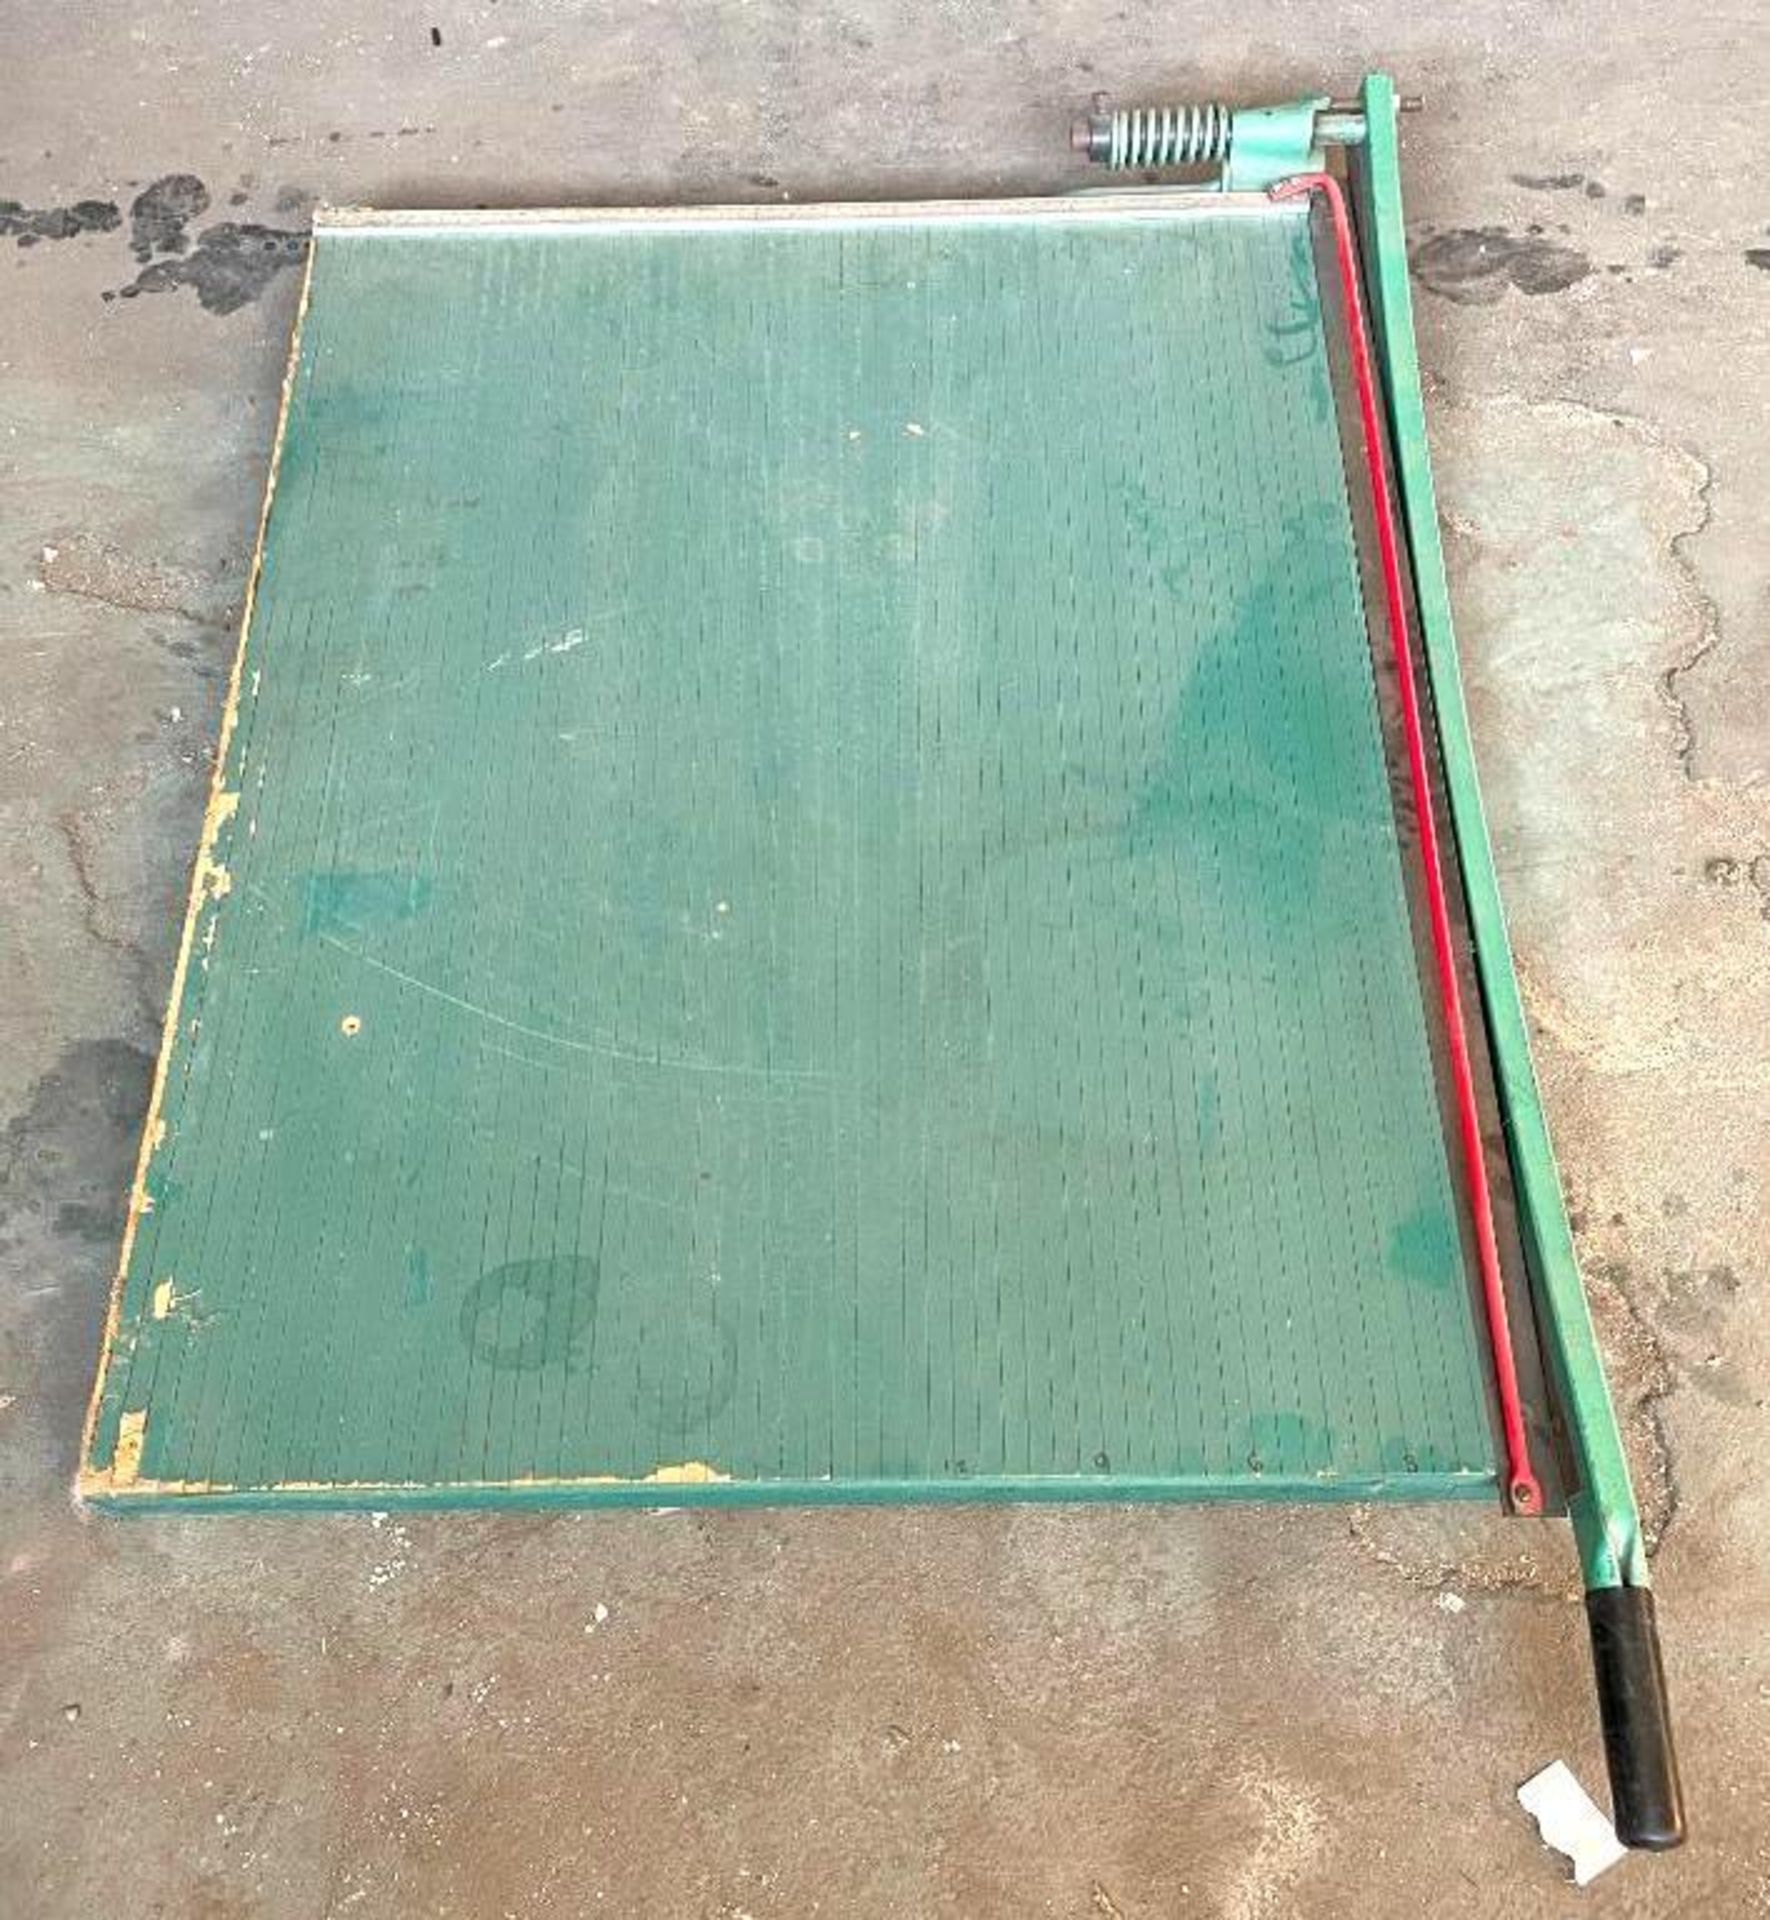 36" X 30" PAPER CUTTER LOCATION ROOM 1 QTY: 1